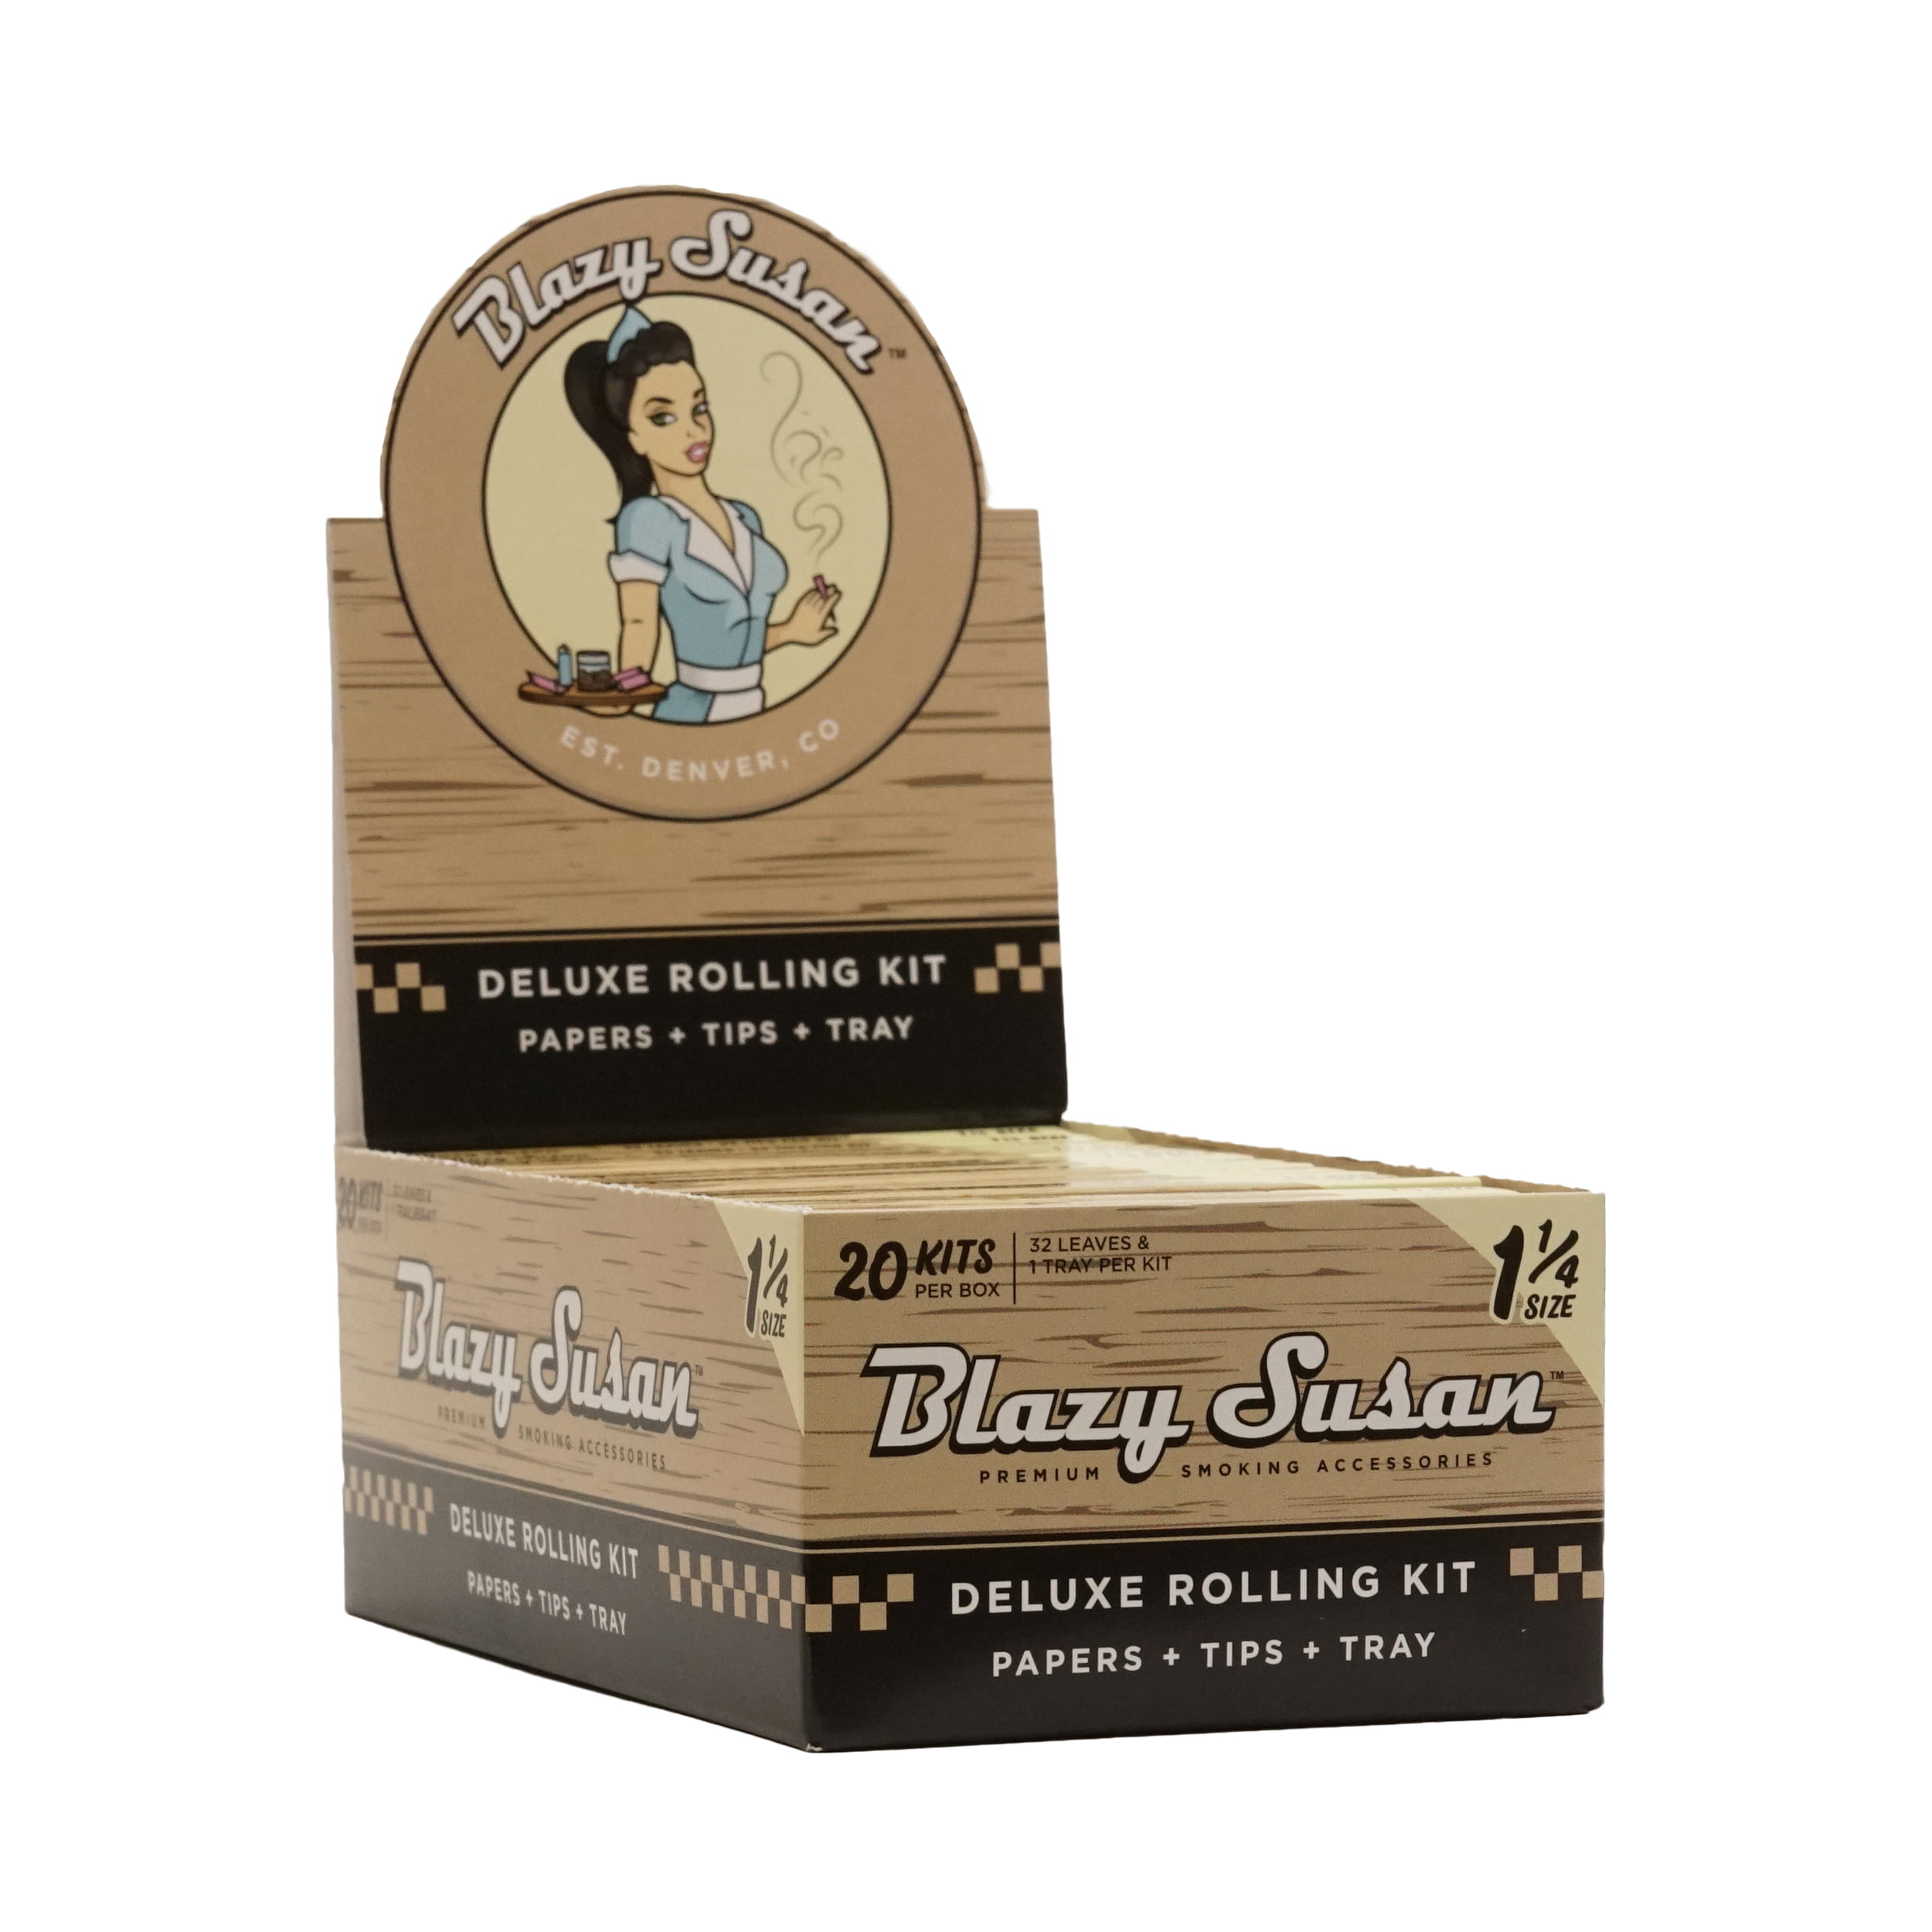 Blazy Susan Rolling Papers King Slim Deluxe Kit 20ct. - High Mountain  Imports